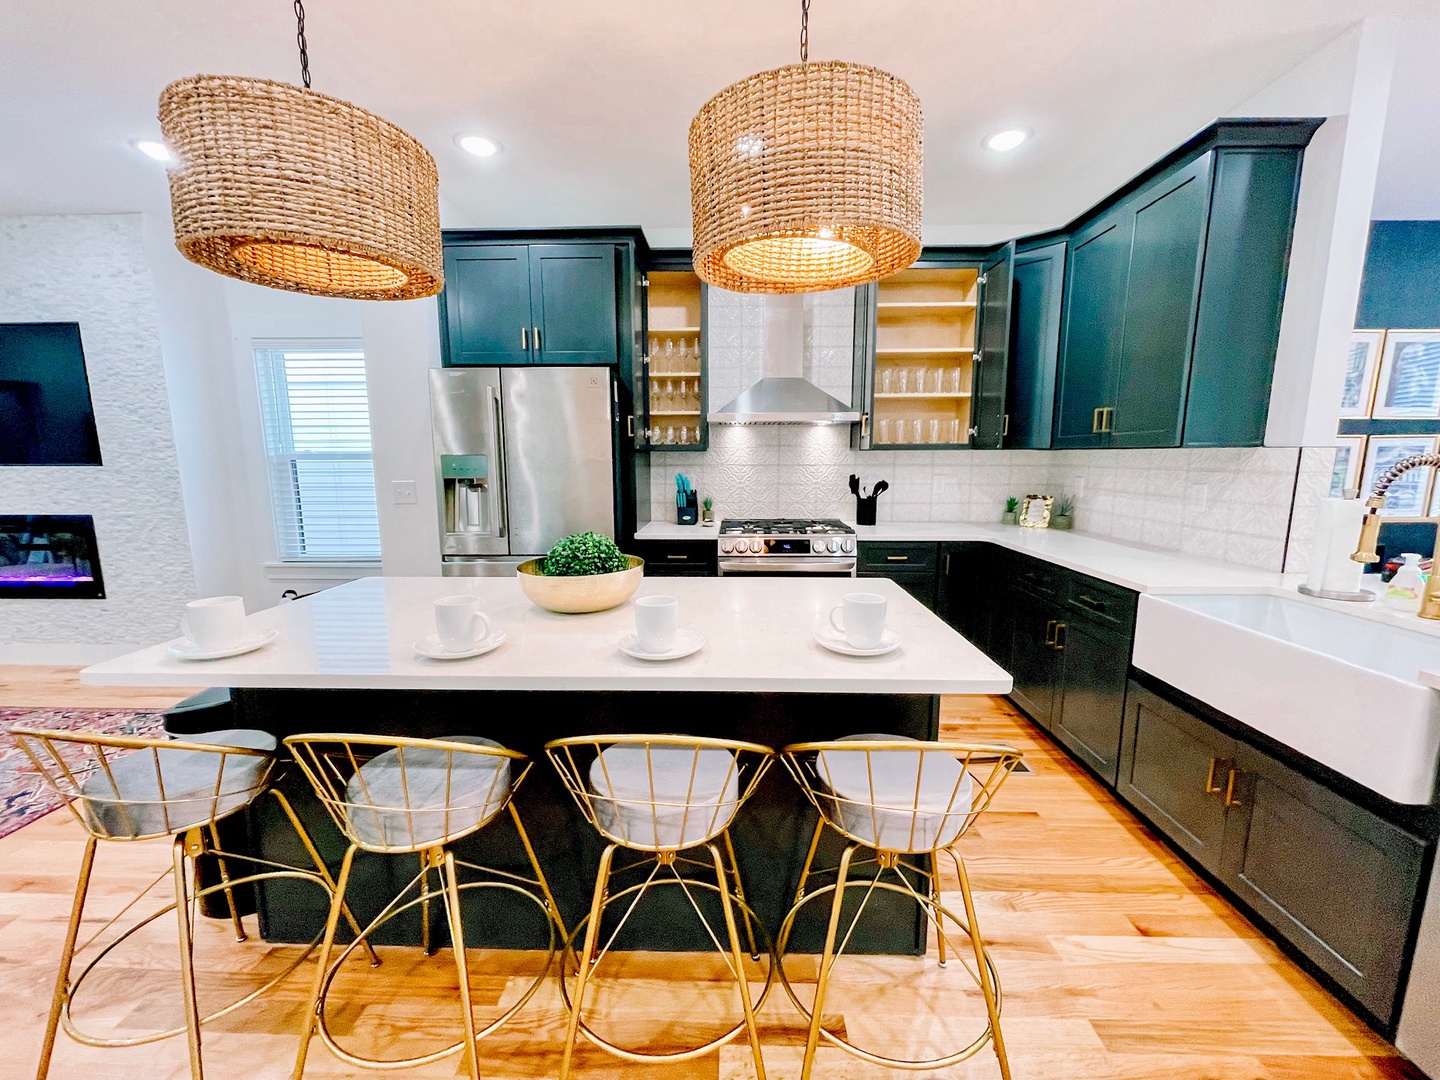 This gorgeous, chic kitchen is well-equipped for your visit to Nashville